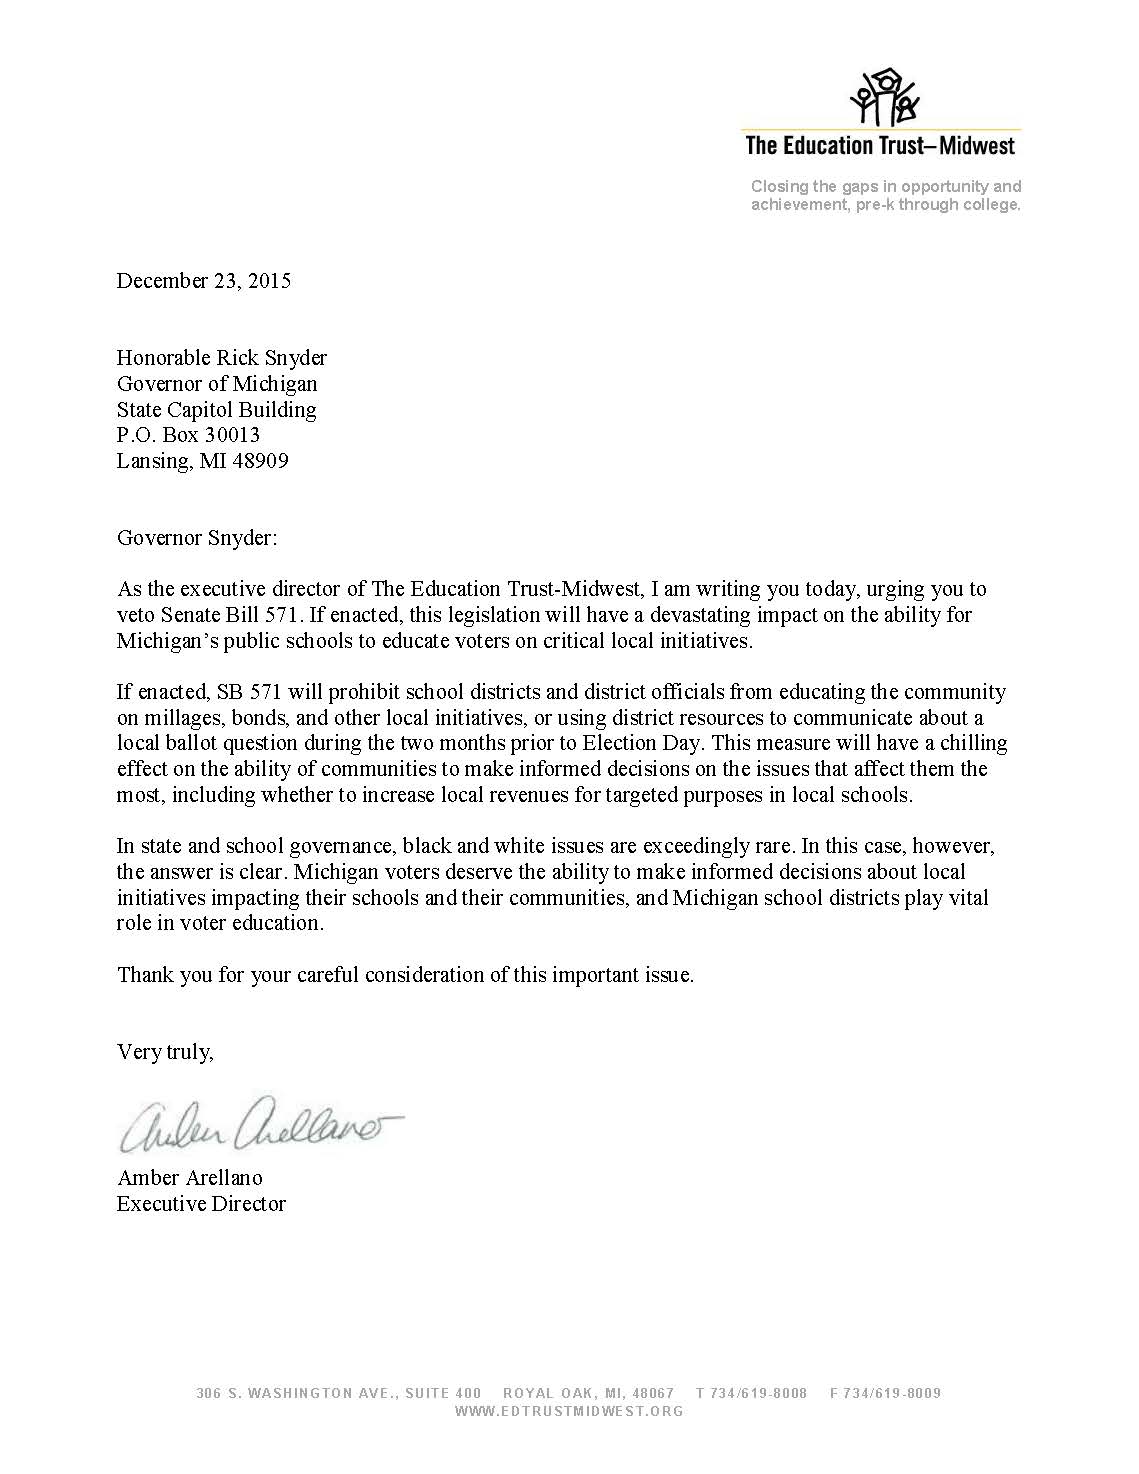 December 23, 2015 Honorable Rick Snyder Governor of Michigan State Capitol Building P.O. Box 30013 Lansing, MI 48909 Governor Snyder: As the executive director of The Education Trust-Midwest, I am writing you today, urging you to veto Senate Bill 571. If enacted, this legislation will have a devastating impact on the ability for Michigan’s public schools to educate voters on critical local initiatives. If enacted, SB 571 will prohibit school districts and district officials from educating the community on millages, bonds, and other local initiatives, or using district resources to communicate about a local ballot question during the two months prior to Election Day. This measure will have a chilling effect on the ability of communities to make informed decisions on the issues that affect them the most, including whether to increase local revenues for targeted purposes in local schools. In state and school governance, black and white issues are exceedingly rare. In this case, however, the answer is clear. Michigan voters deserve the ability to make informed decisions about local initiatives impacting their schools and their communities, and Michigan school districts play vital role in voter education. Thank you for your careful consideration of this important issue. Very truly, Amber Arellano Executive Director